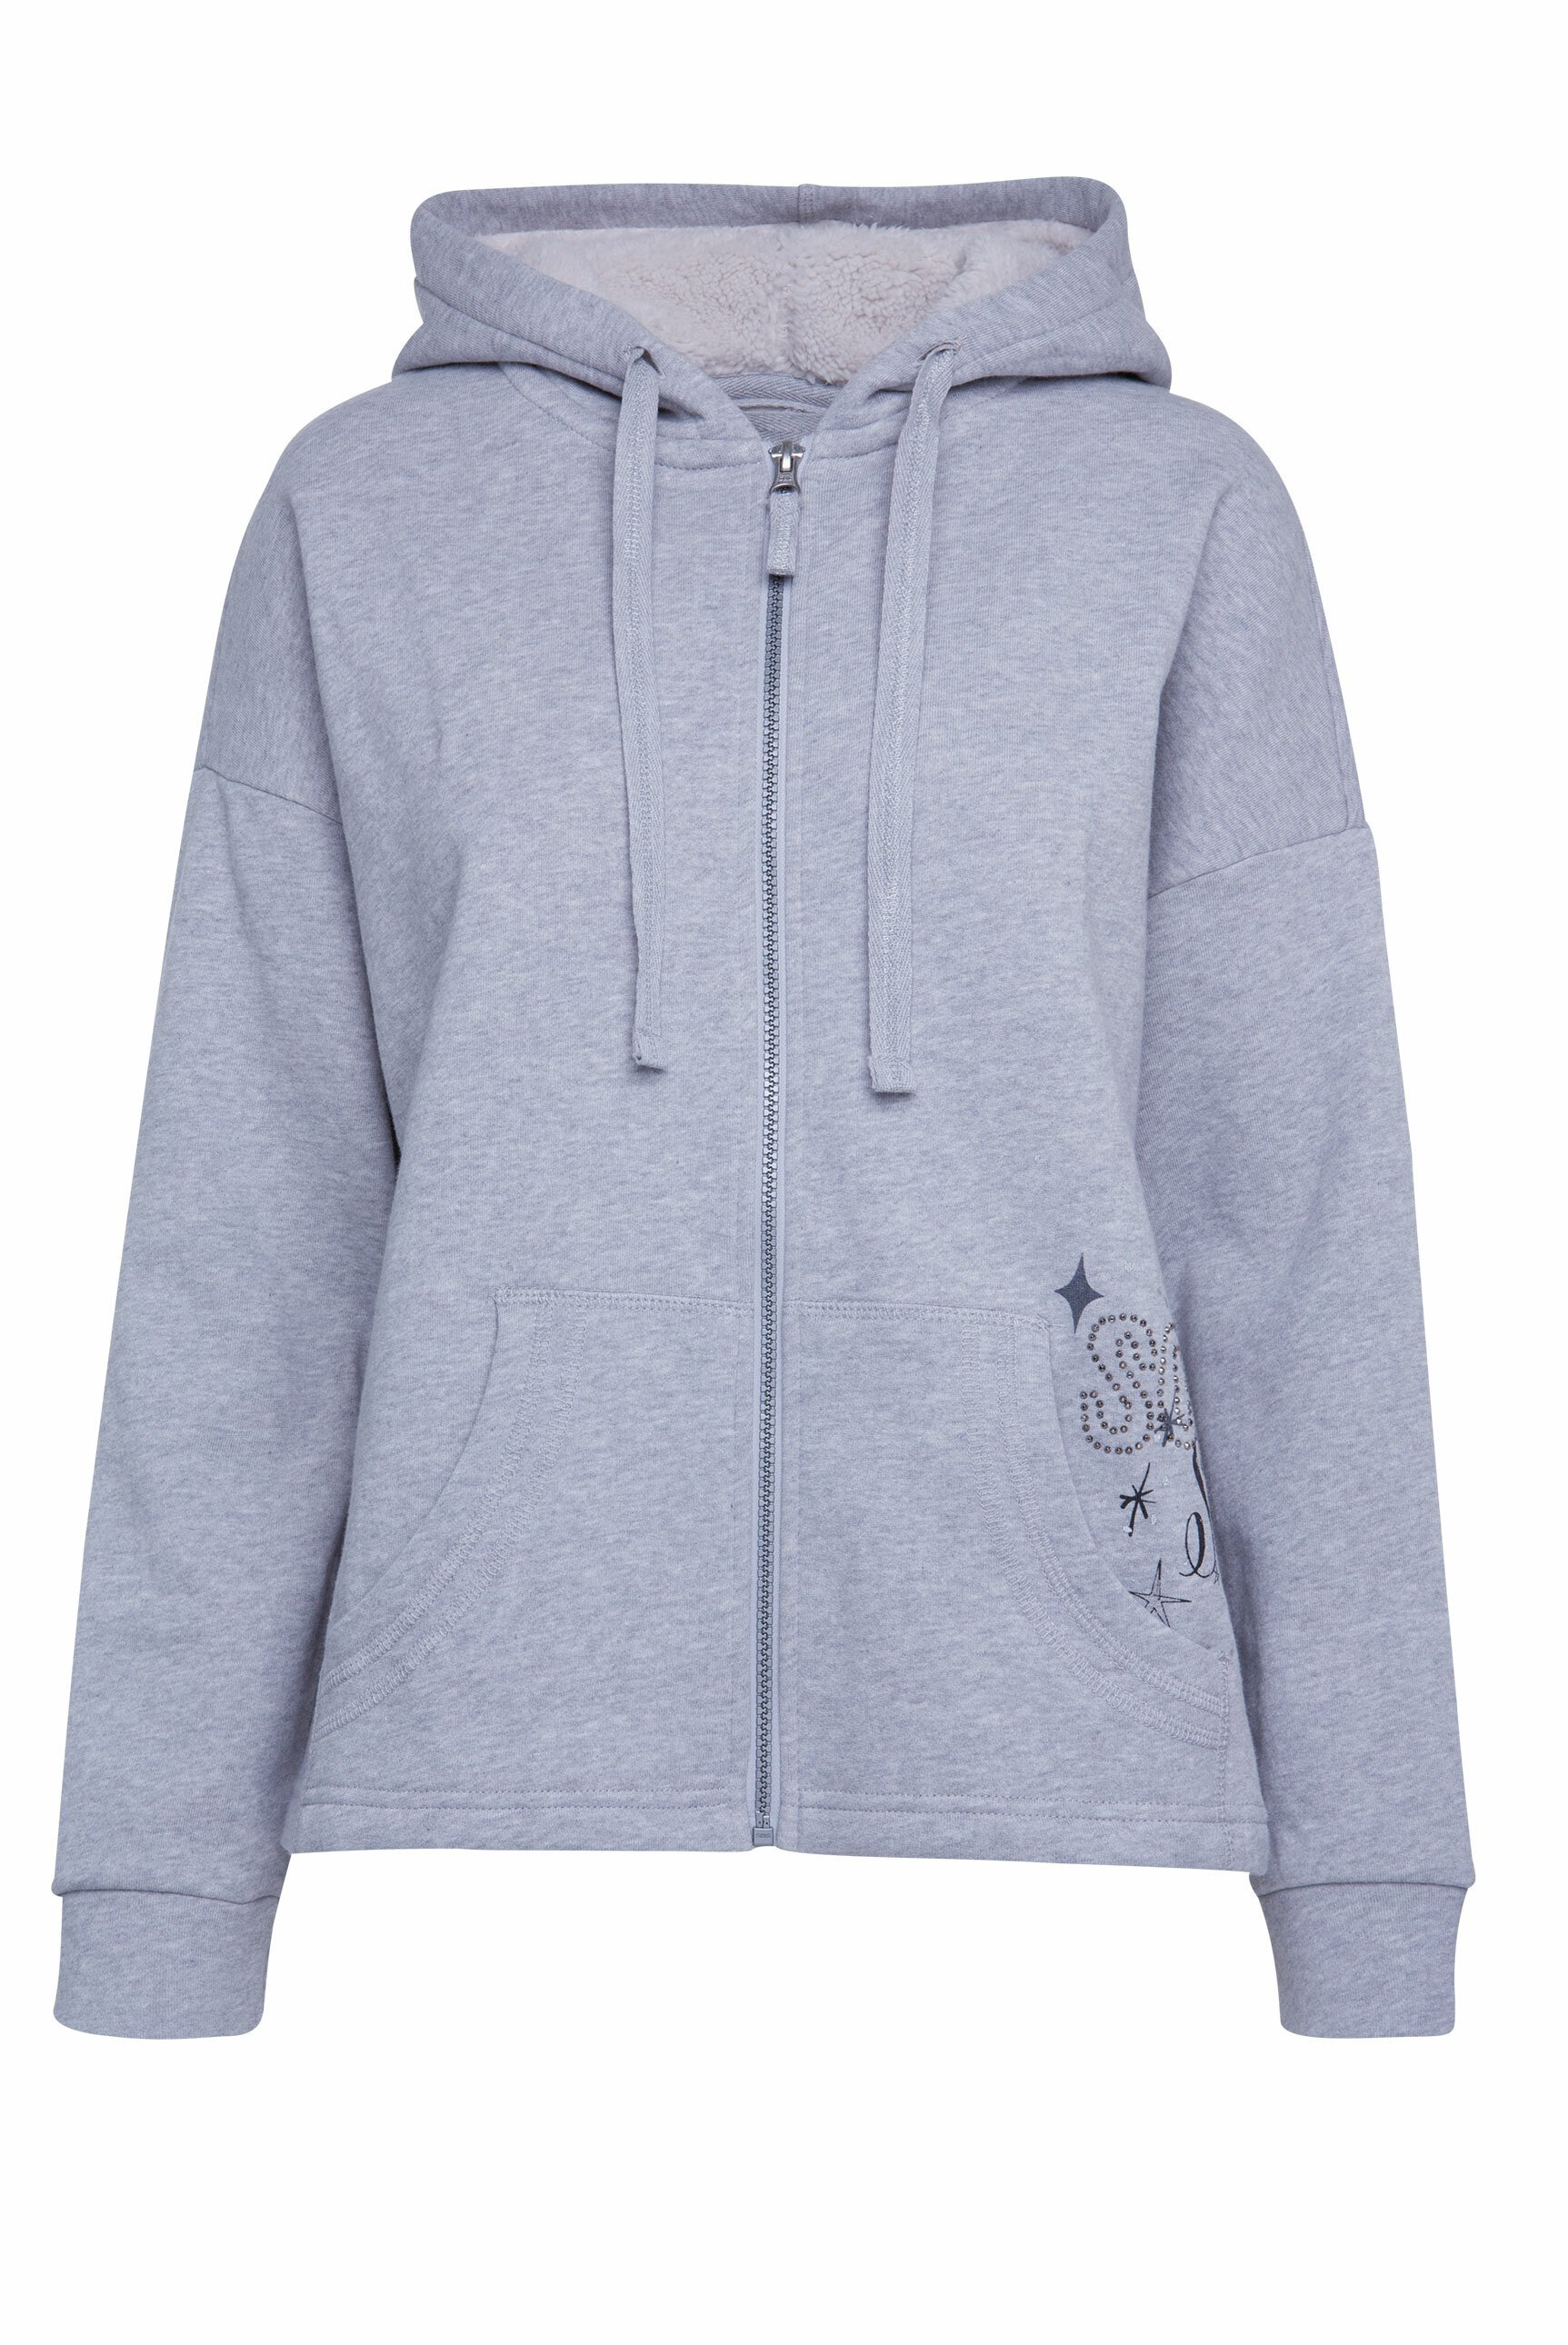 Image of Soccx Sweatjacke To the Moon and Back Damen - moon grey melange